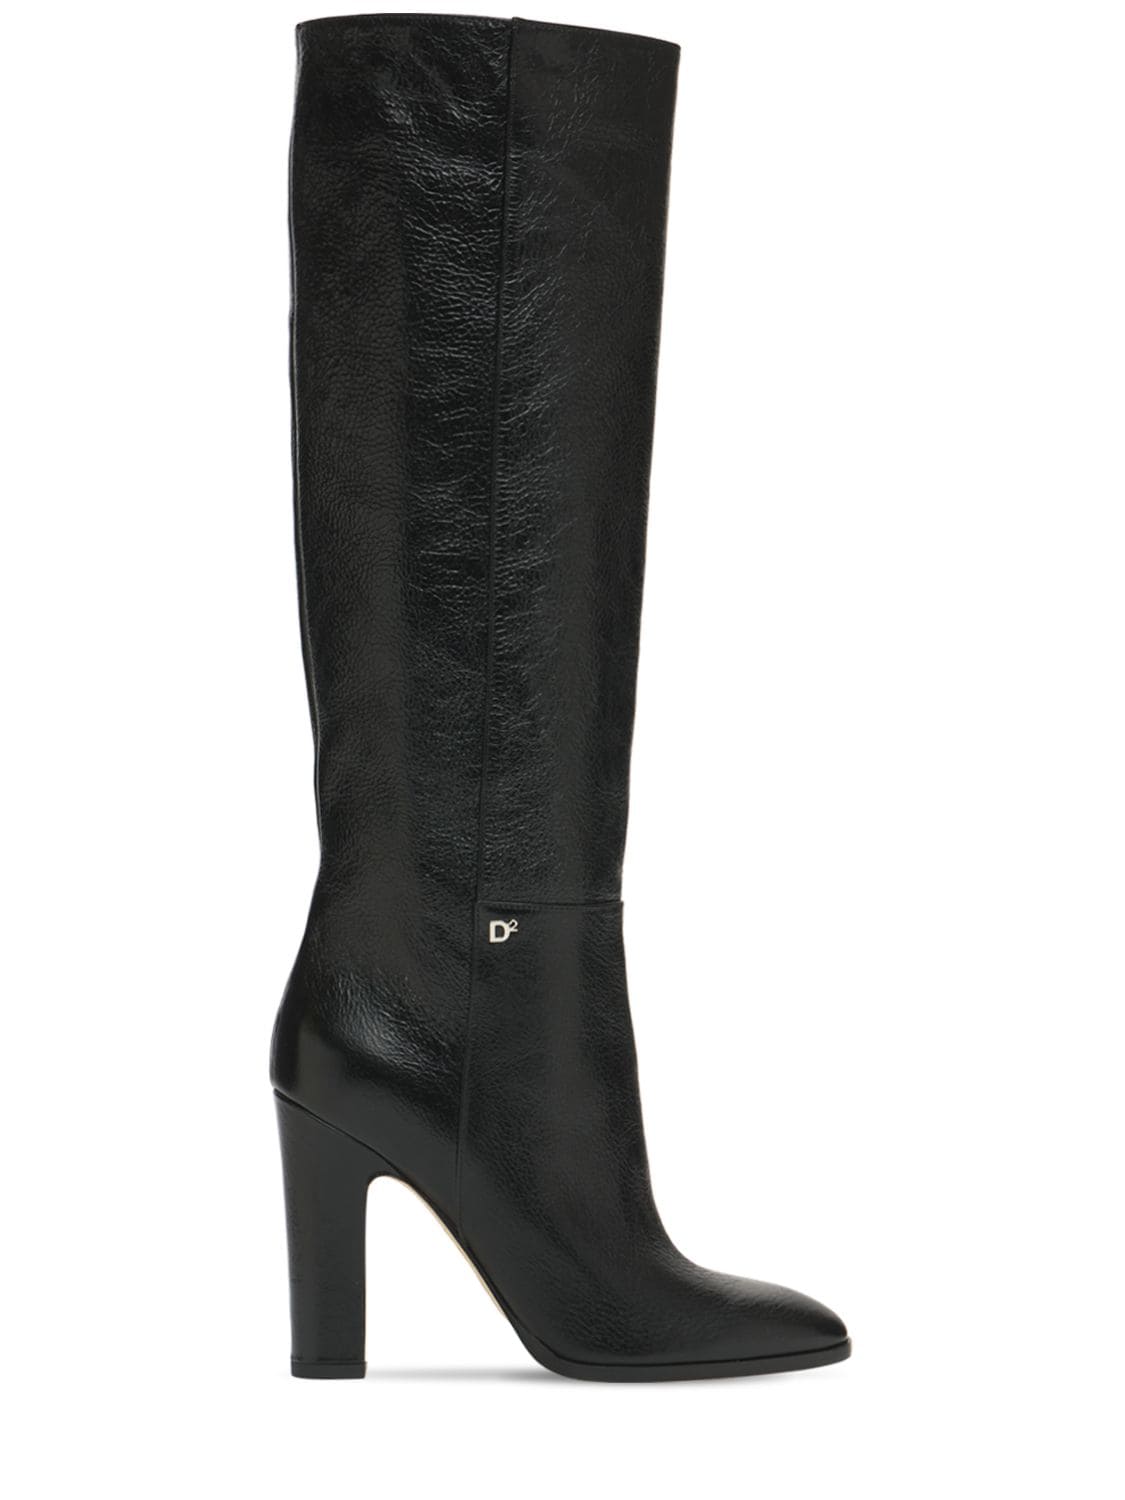 100mm Polished Leather Tall Boots